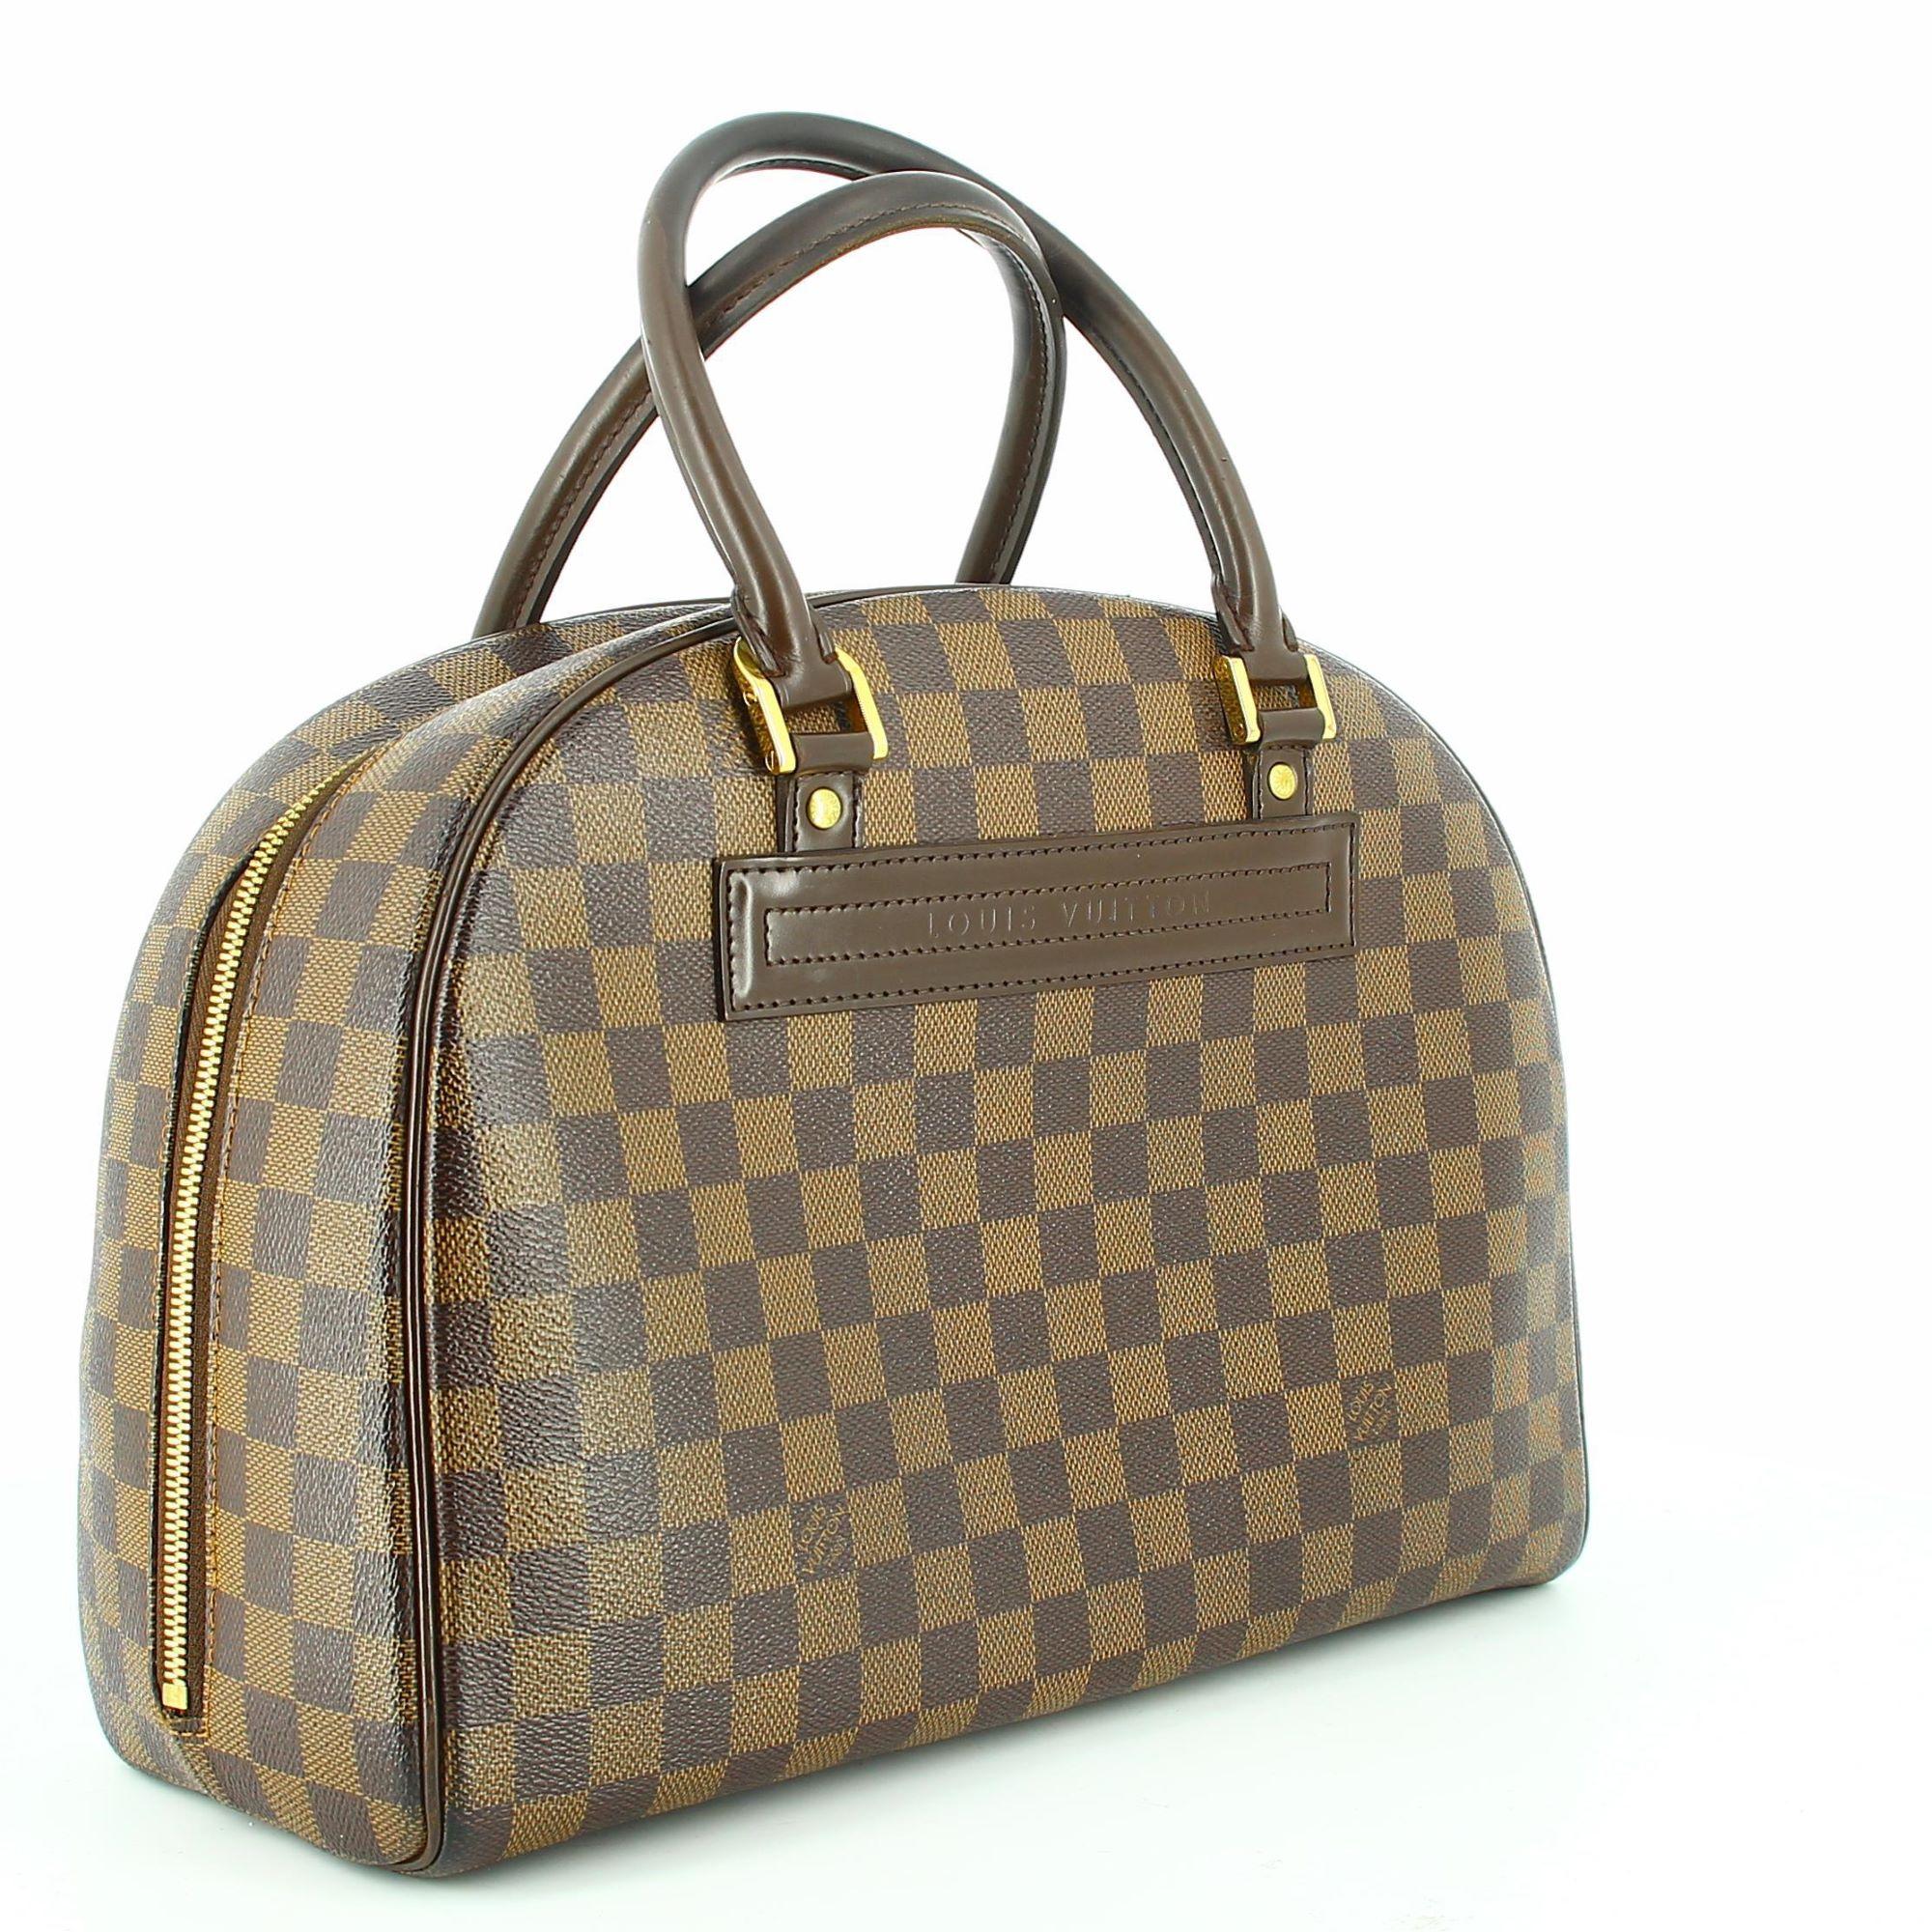 2003 Louis Vuitton Damier Nolita Bag.
Very good condition show some signs of use and wear but nothing visible. Double closure leading to an interior with three compartments, one of which has a zip. The perfect companion for your favourite